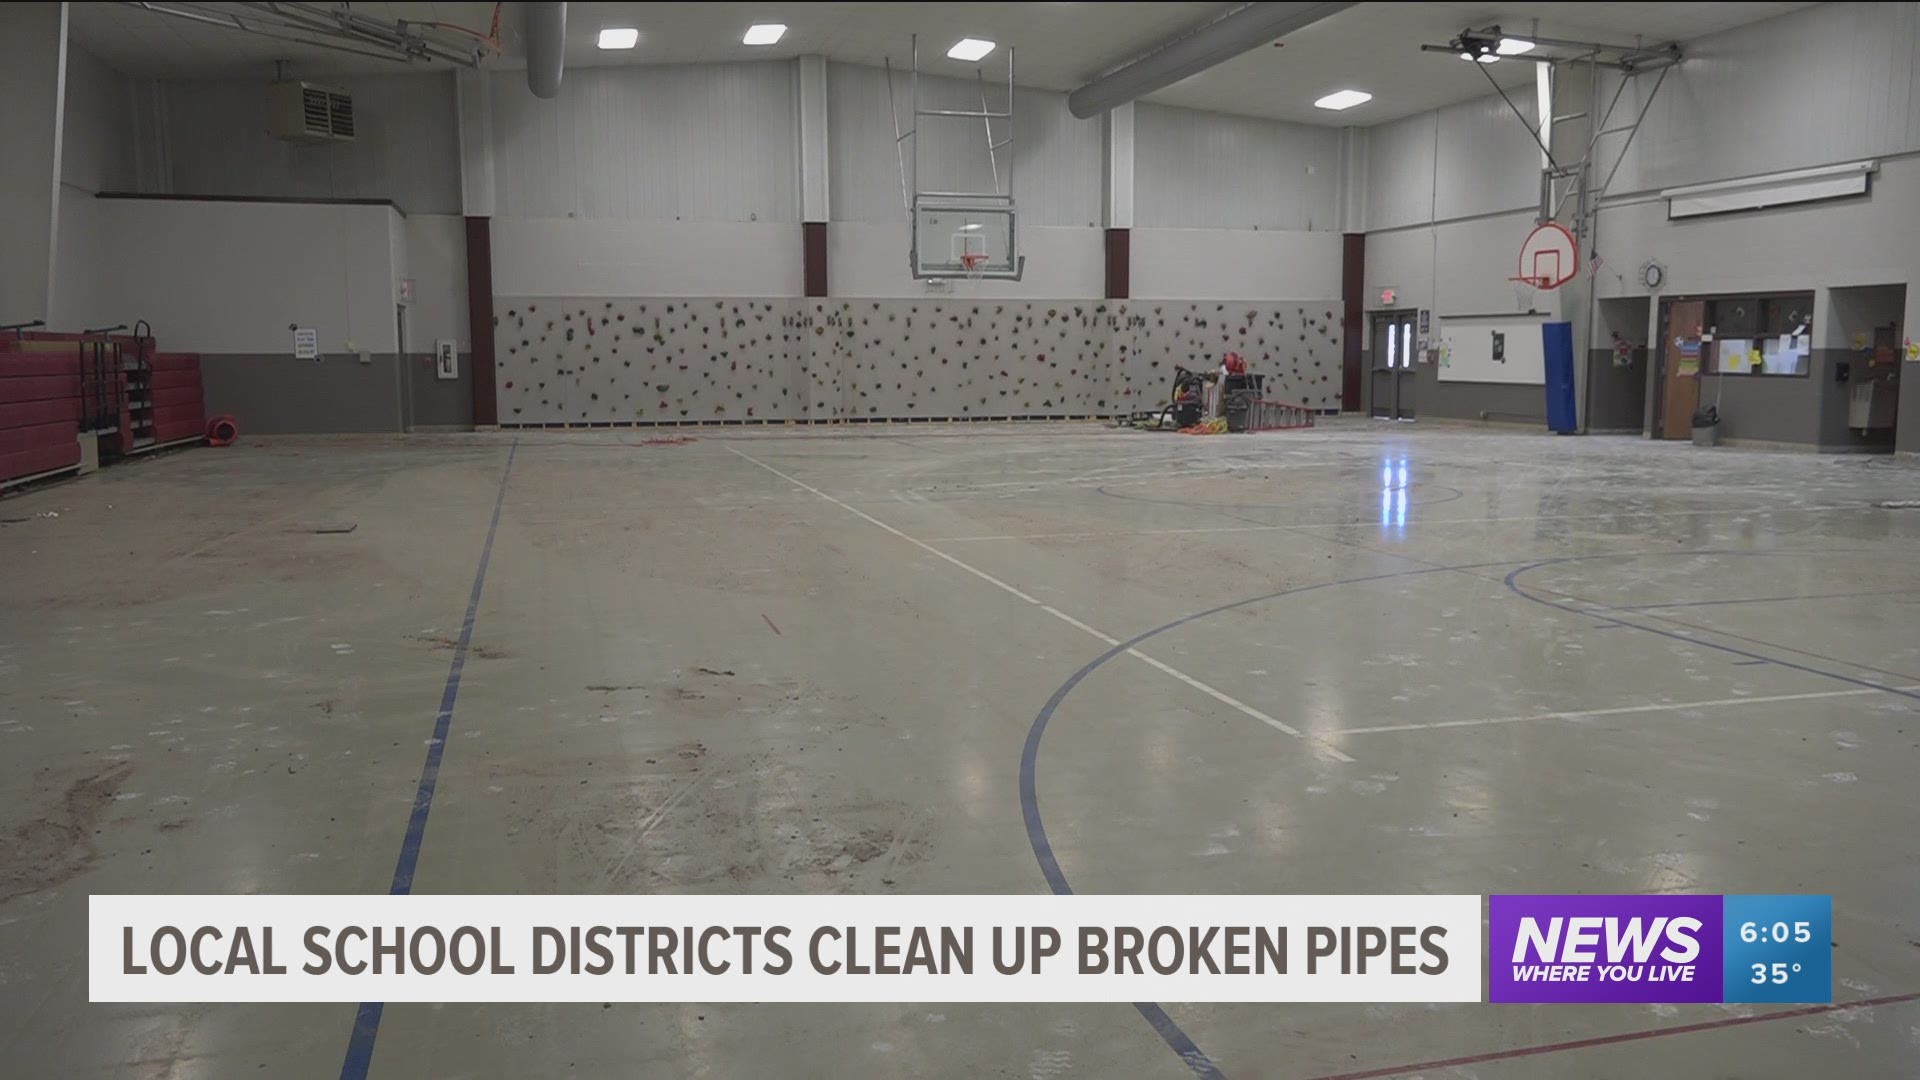 Local school districts clean up mess left behind from broken pipes